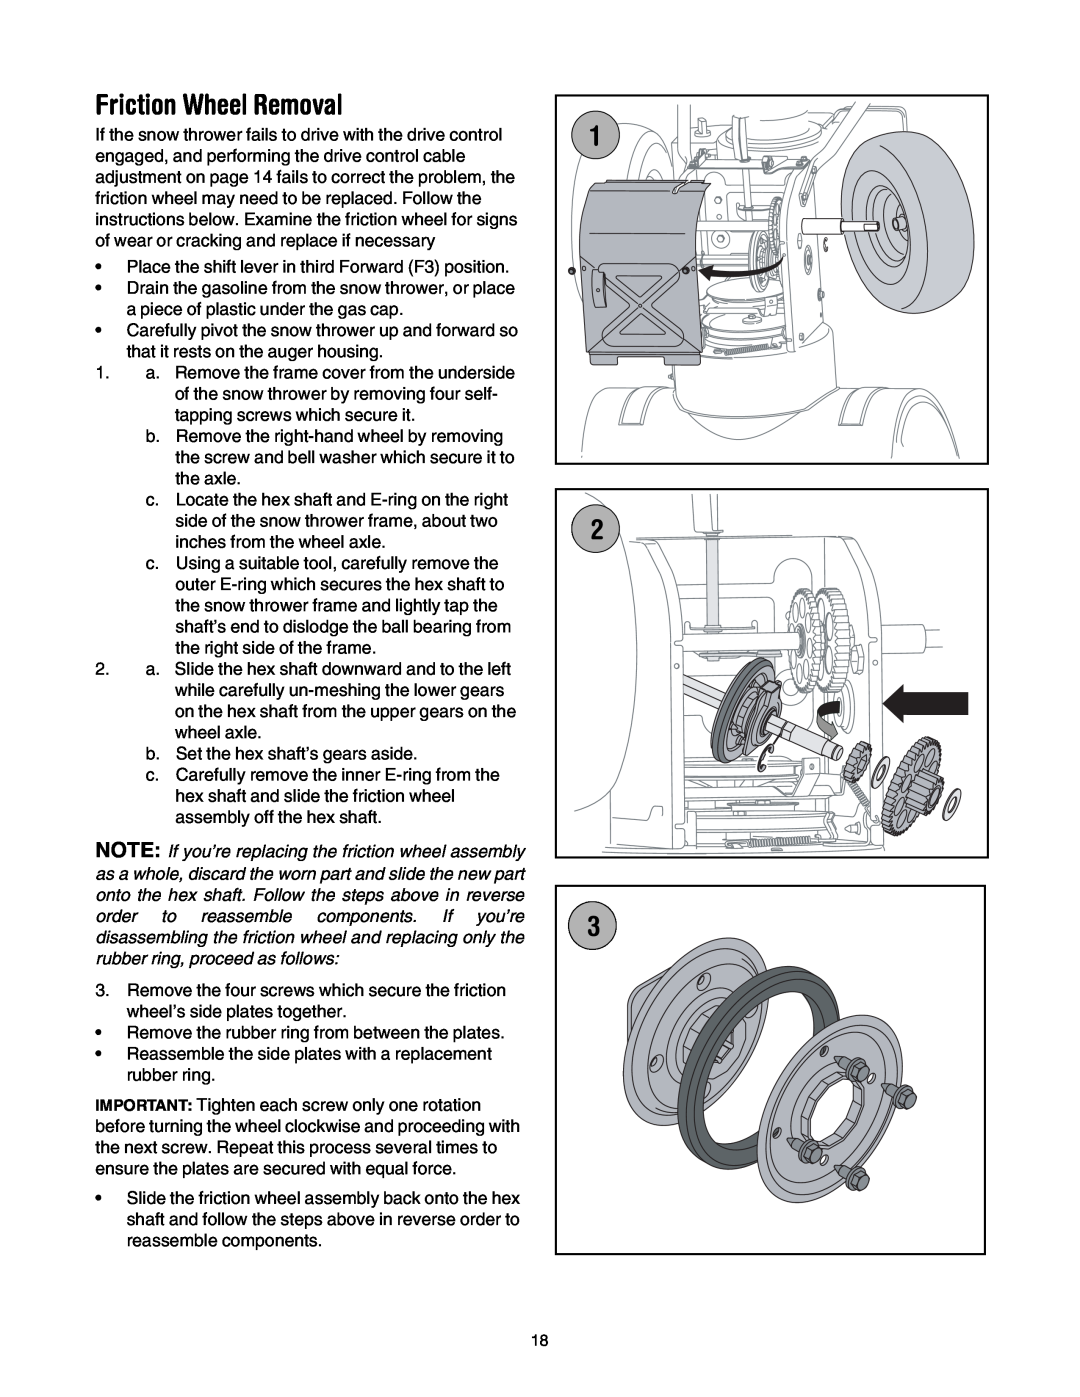 MTD L-Style manual Friction Wheel Removal 